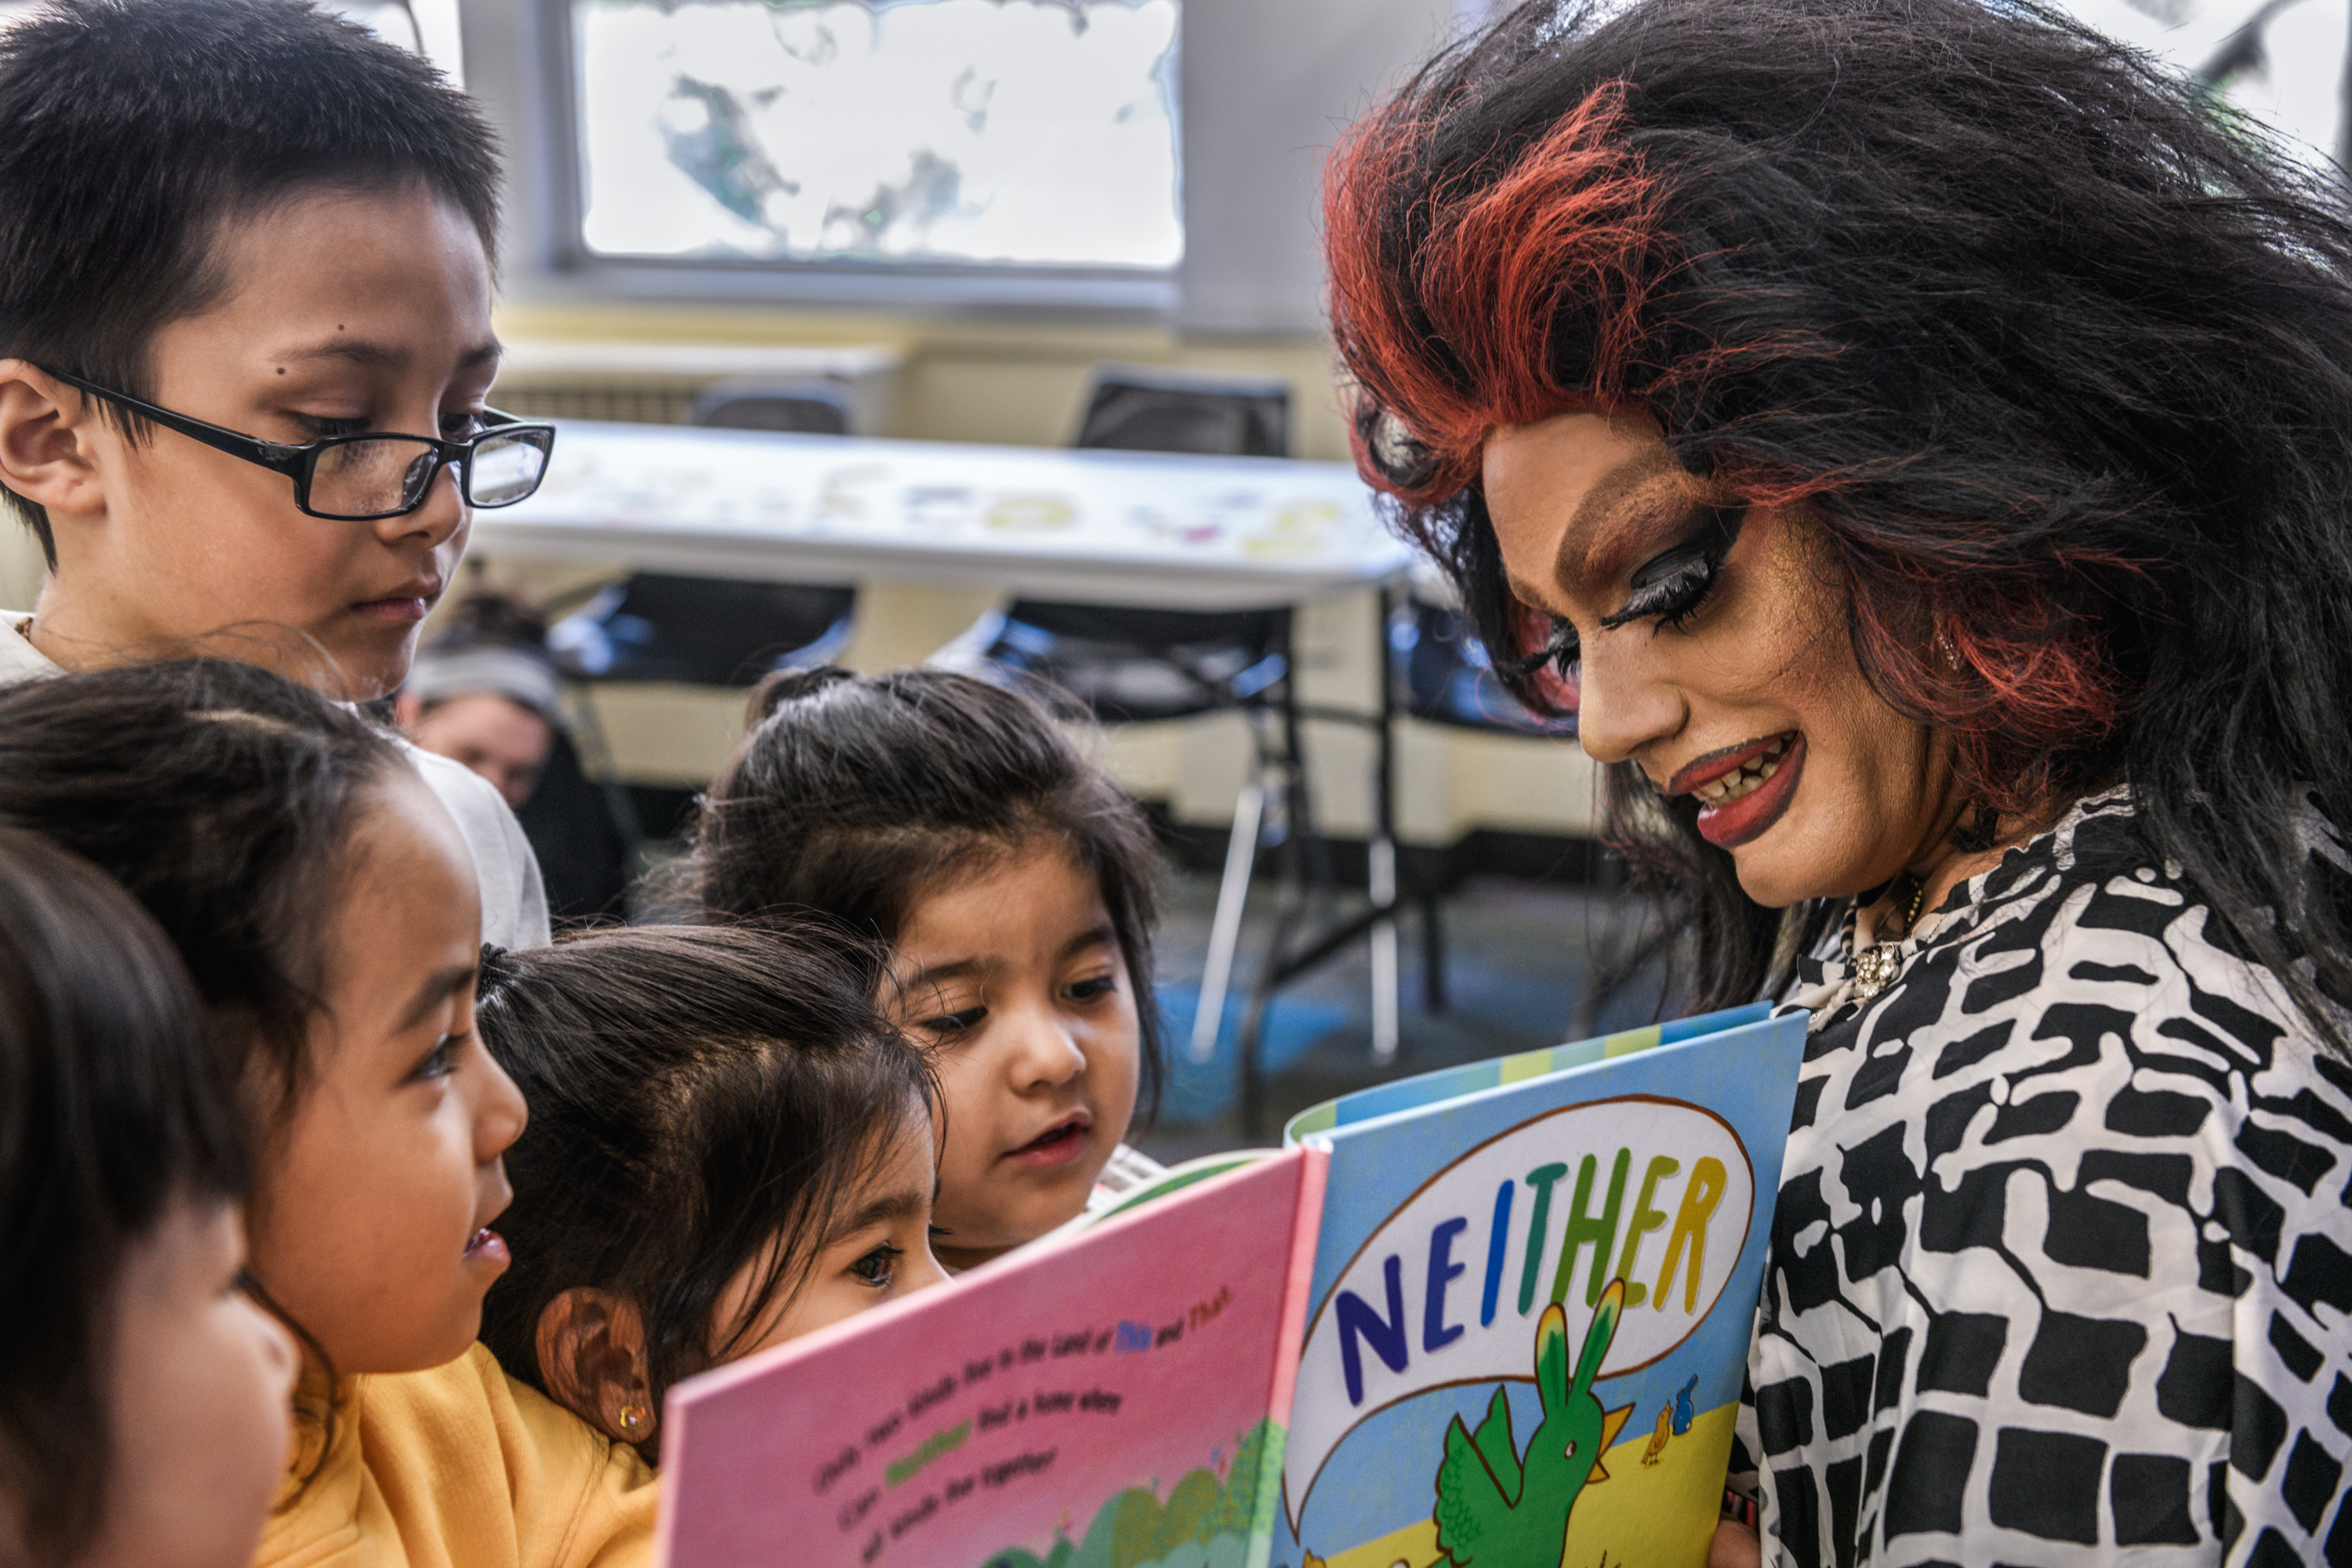 2018-New York-Drag Queen Story Hour-Angel Elektra
at Public Library Jackson Heights